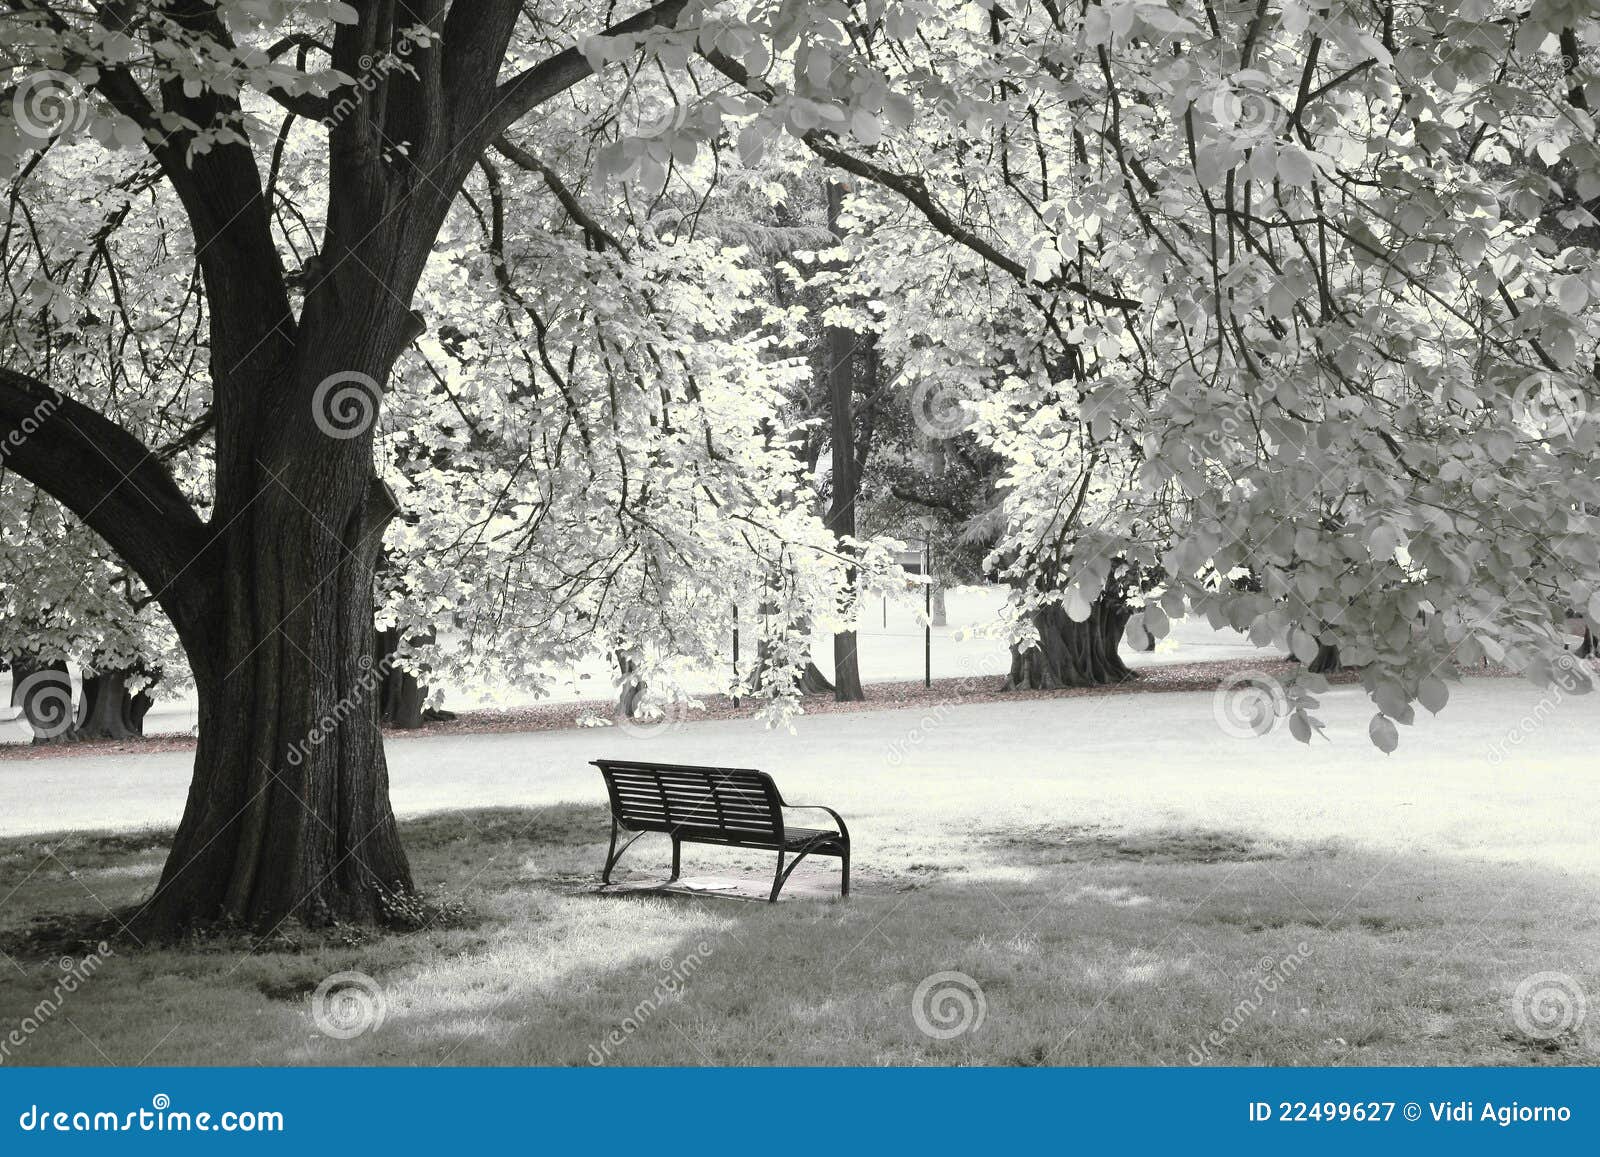 Solitude Stock Image Image Of White Chair Tree Alone 22499627